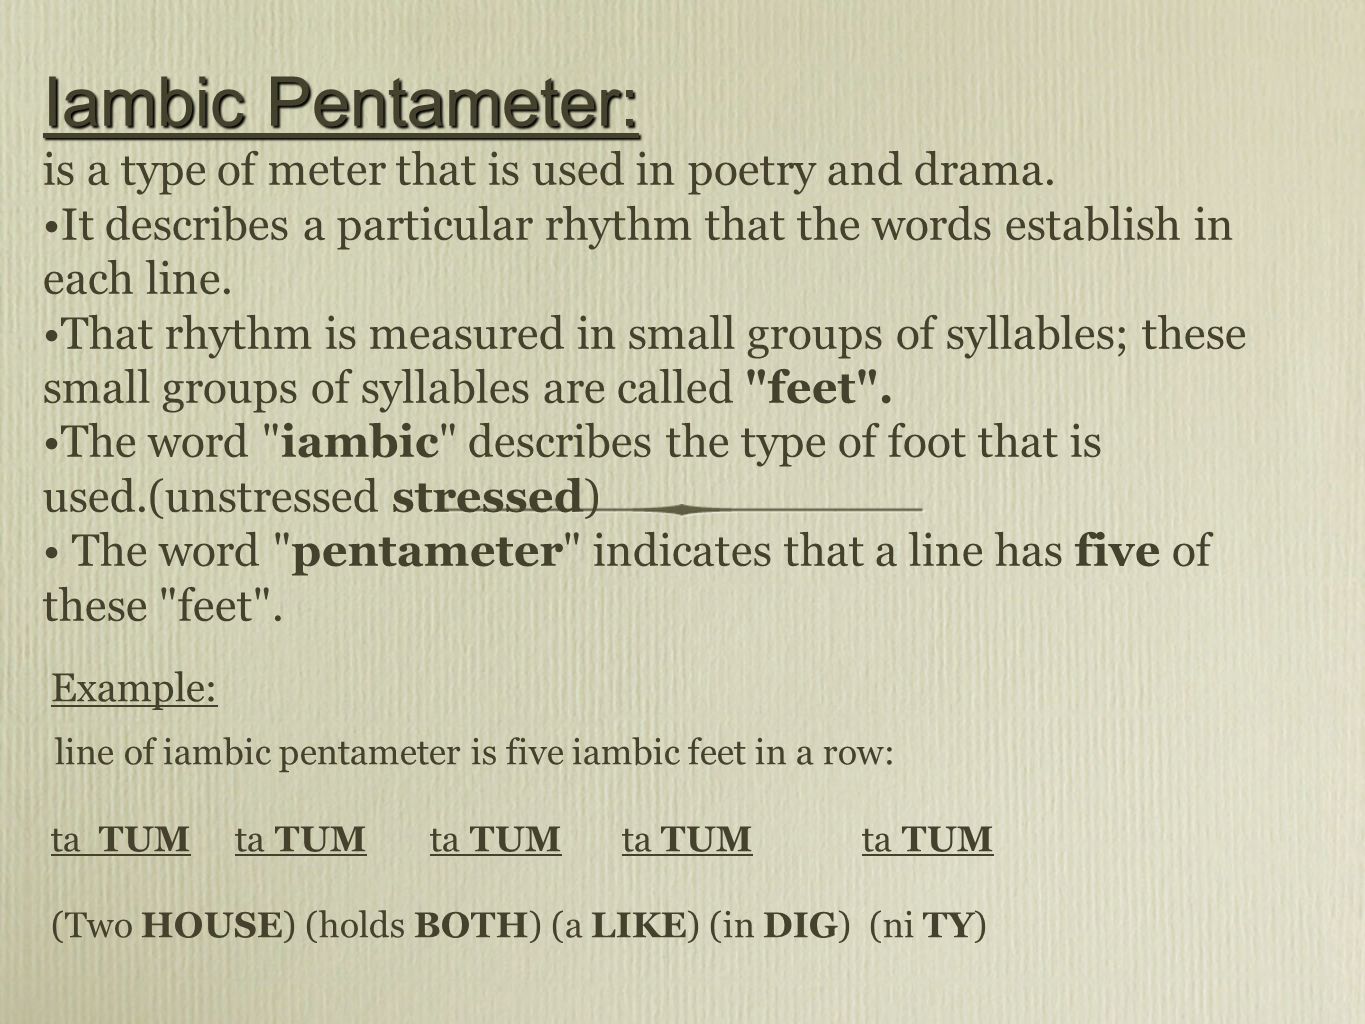 Iambic Pentameter: is a type of meter that is used in poetry and